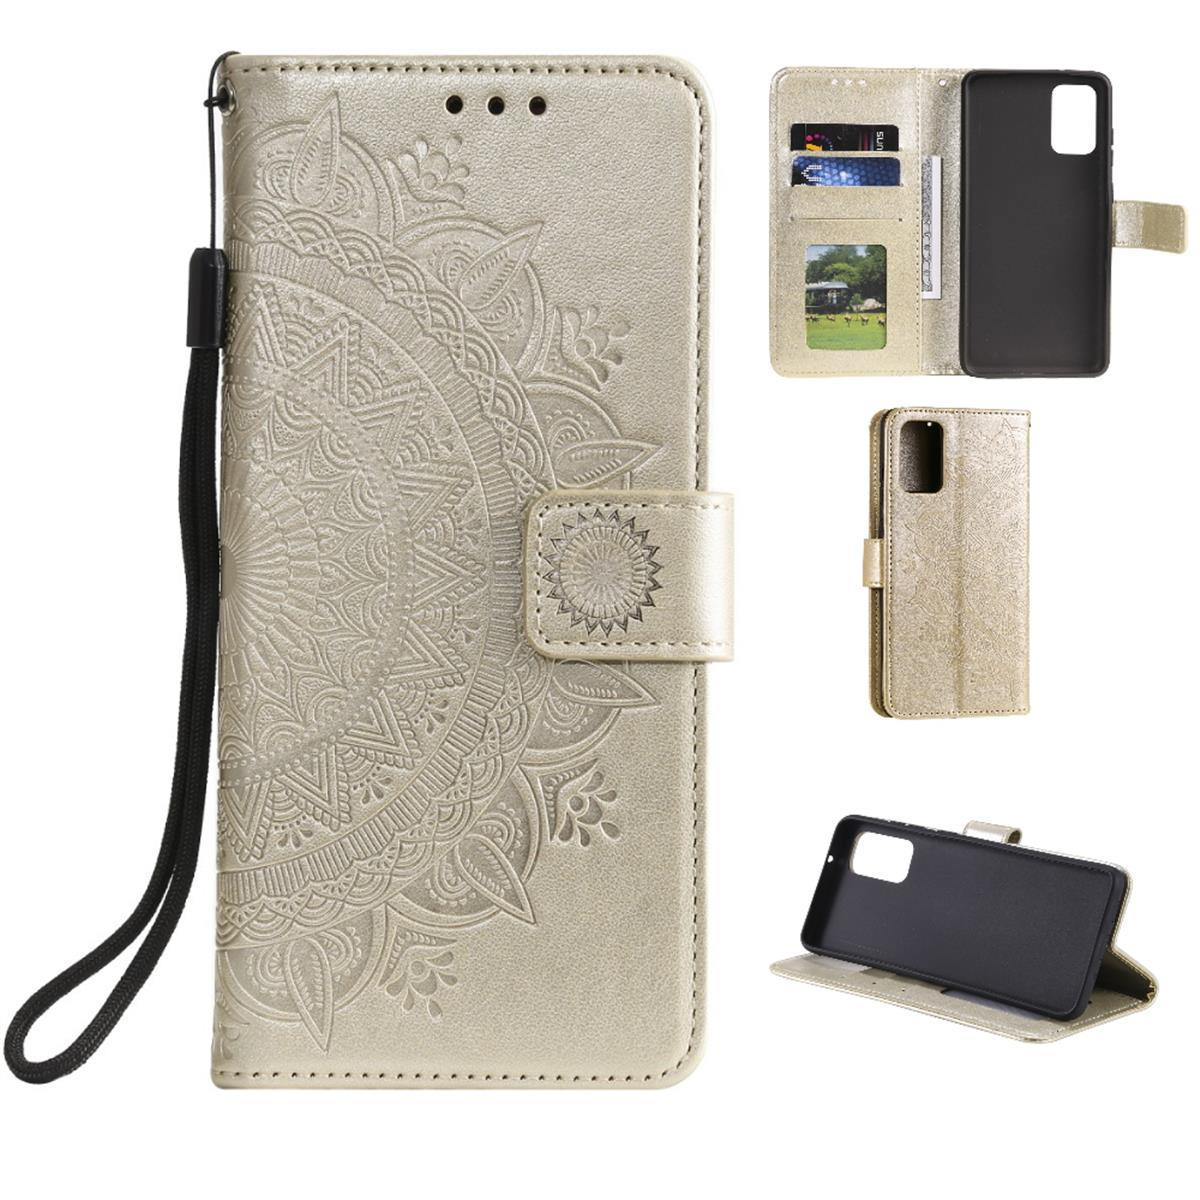 COVERKINGZ Klapphülle mit Galaxy Plus, Samsung, Muster, Mandala S20 Gold Bookcover